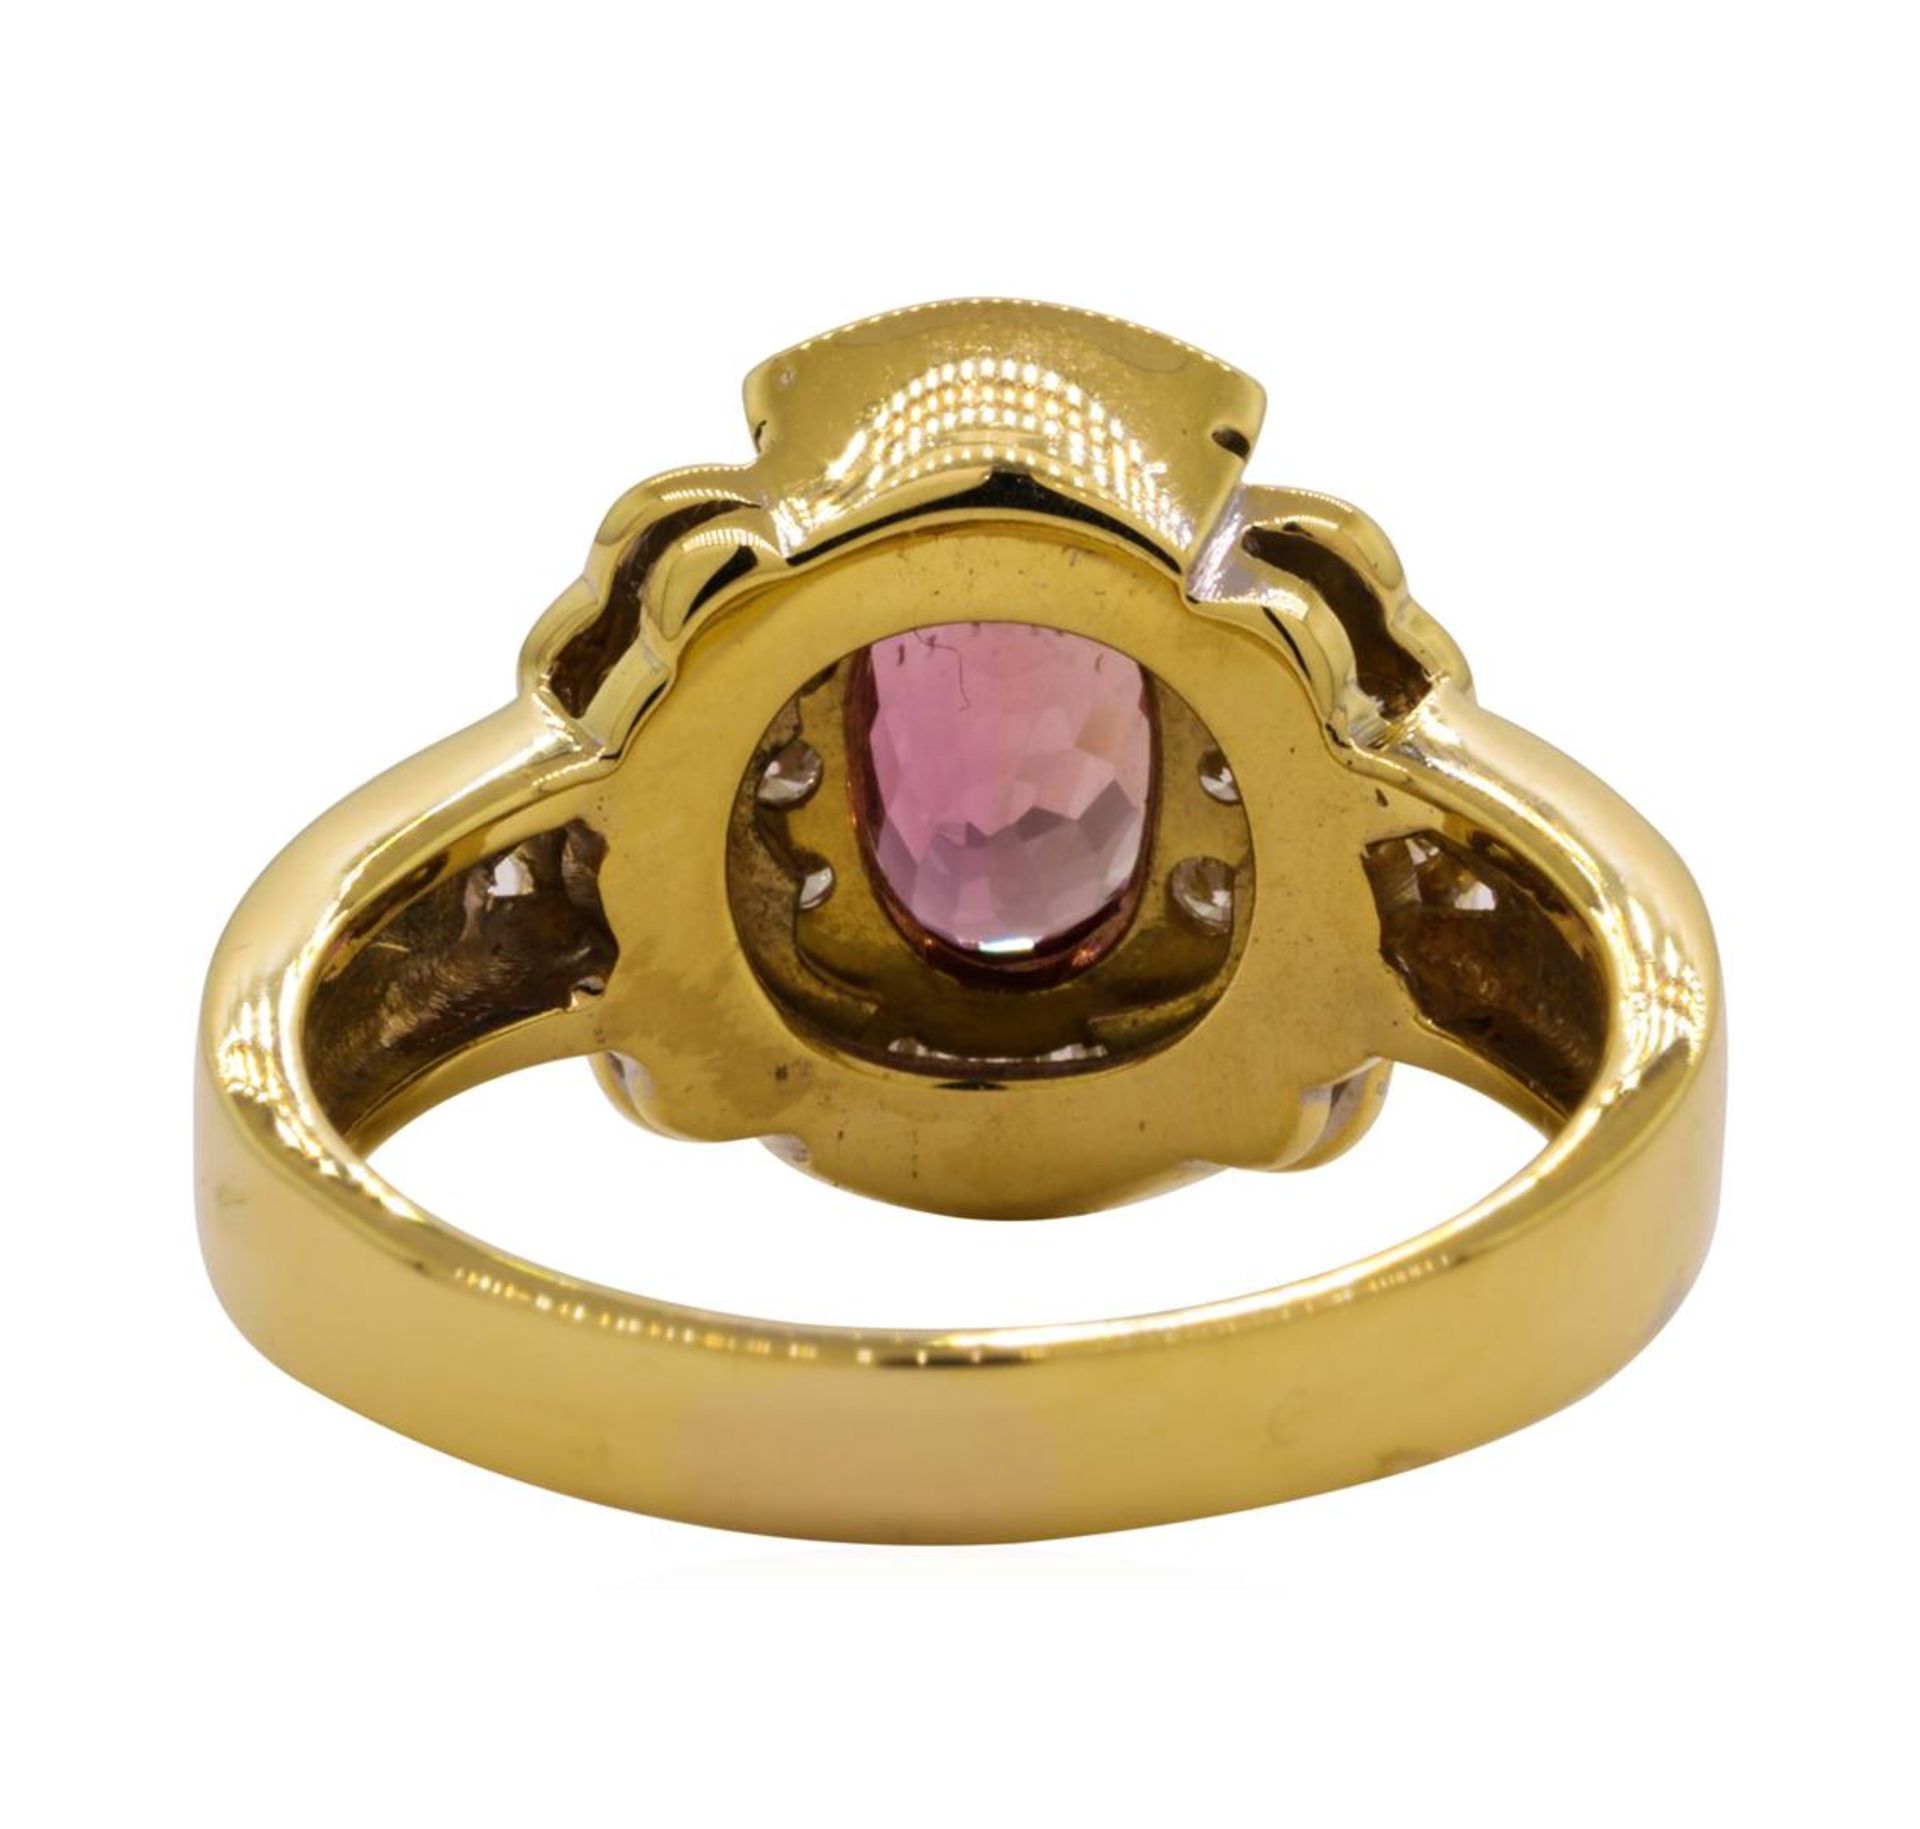 1.82 ctw Pink Spinel and Diamond Ring - 18KT Yellow Gold - Image 3 of 5